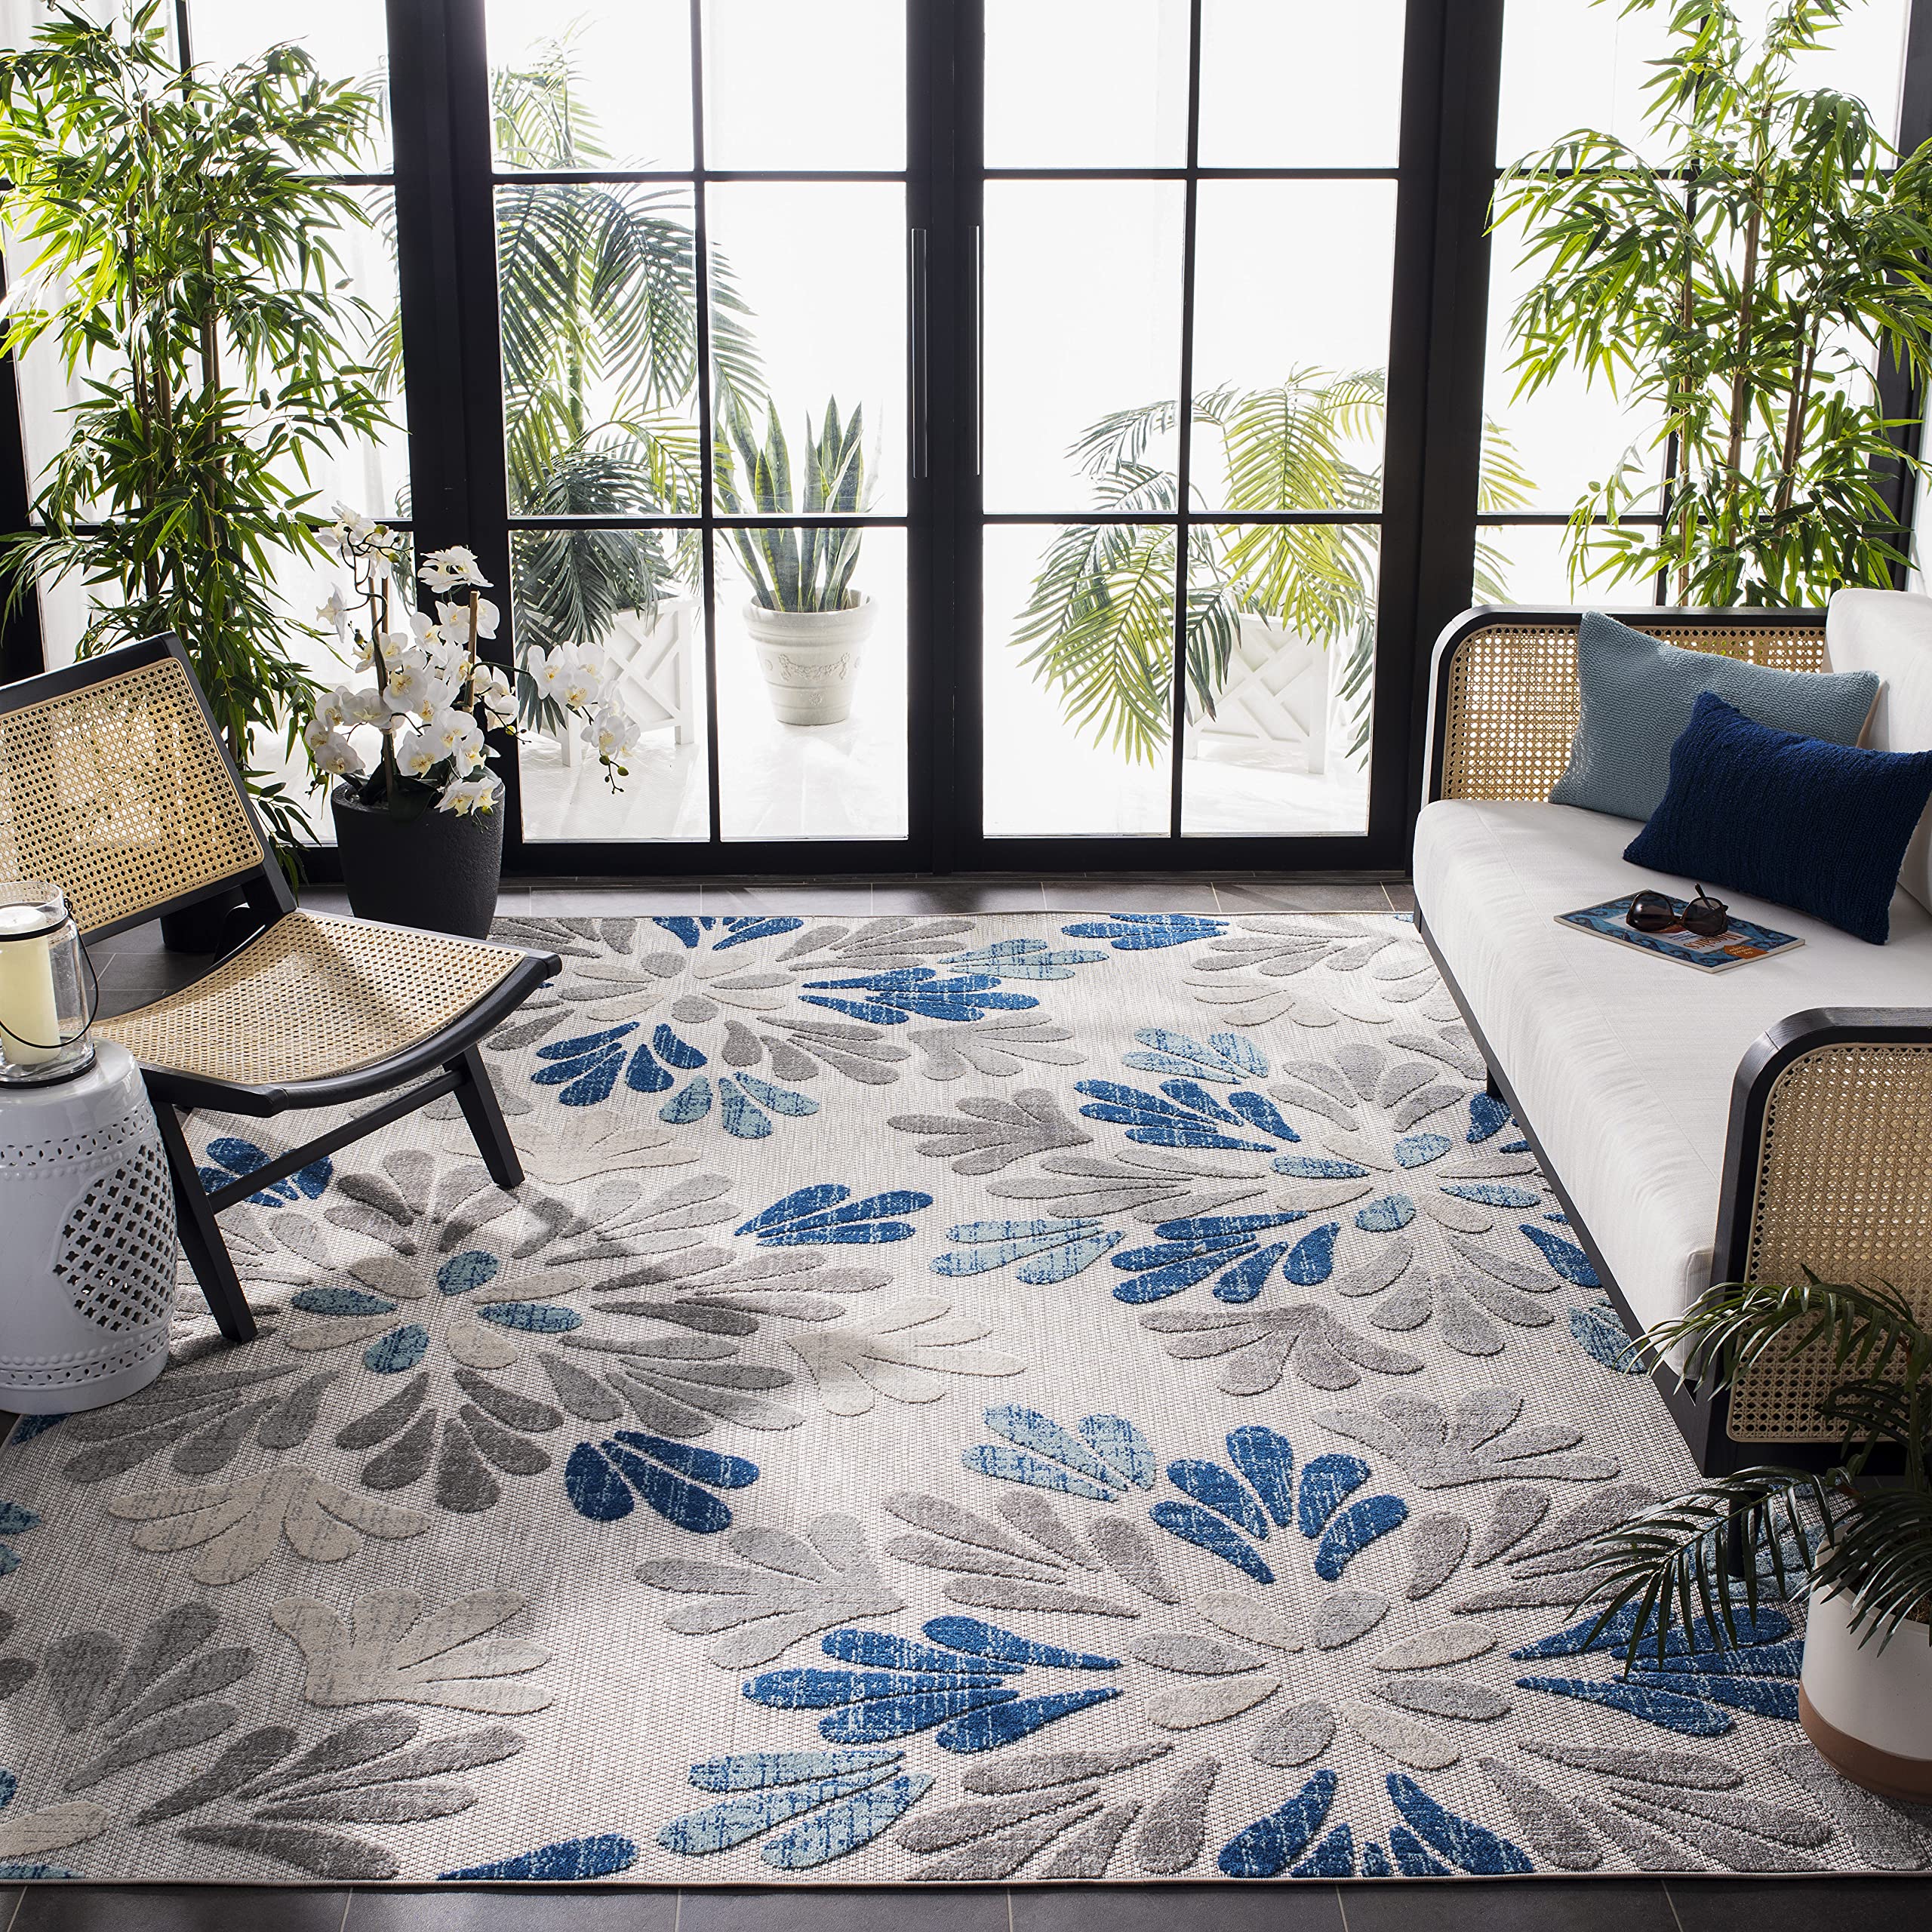 SAFAVIEH Cabana Collection Area Rug - 9' x 12', Grey & Blue, Floral Design, Non-Shedding & Easy Care, Indoor/Outdoor & Washable-Ideal for Patio, Backyard, Mudroom (CBN800F)